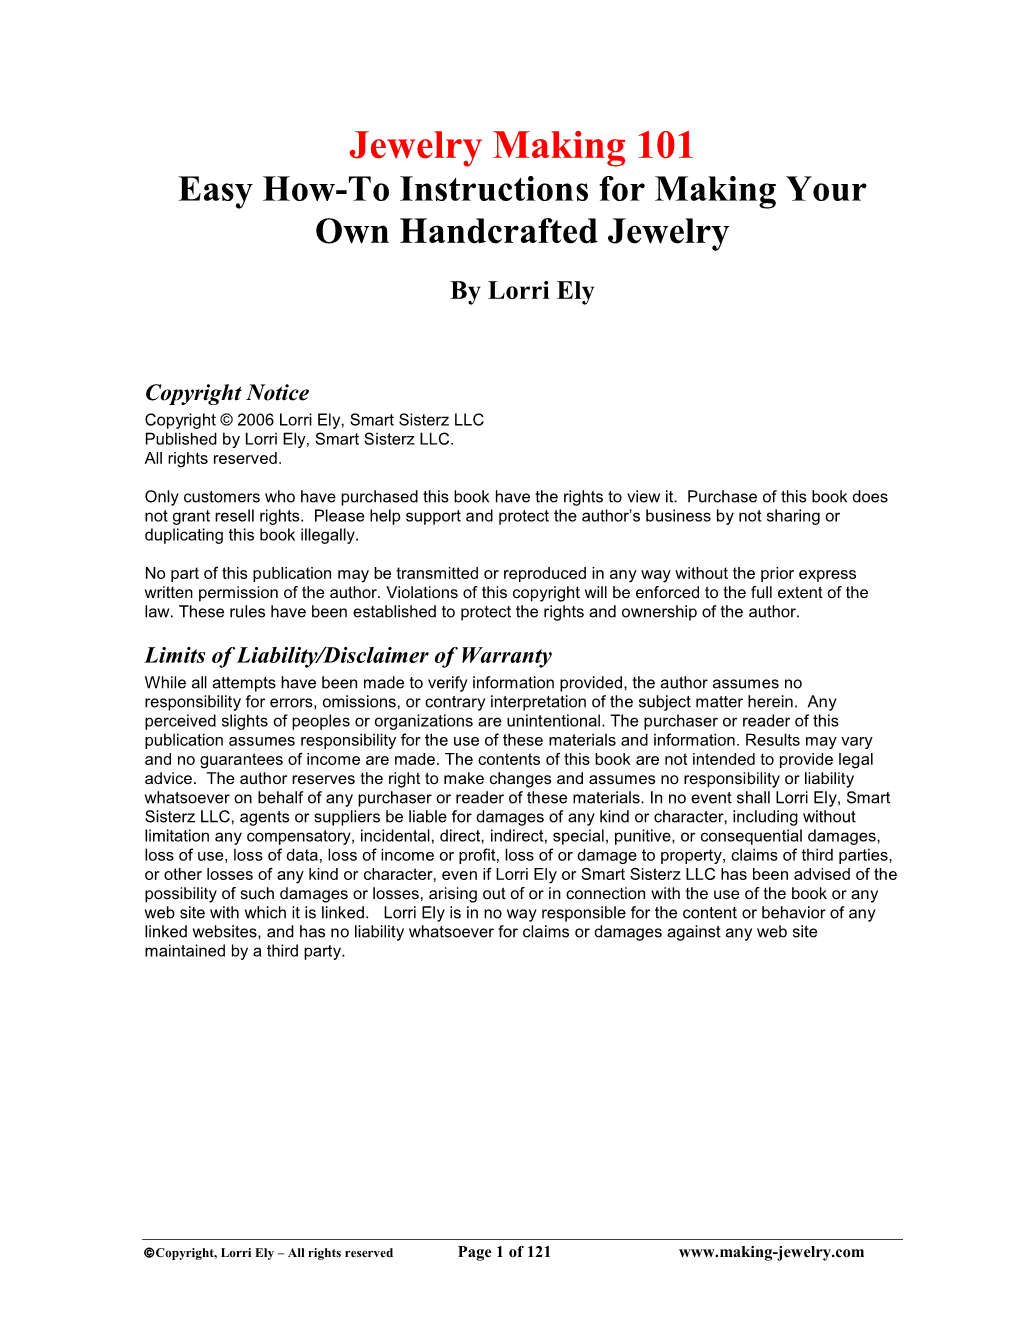 Jewelry Making 101 Easy How-To Instructions for Making Your Own Handcrafted Jewelry